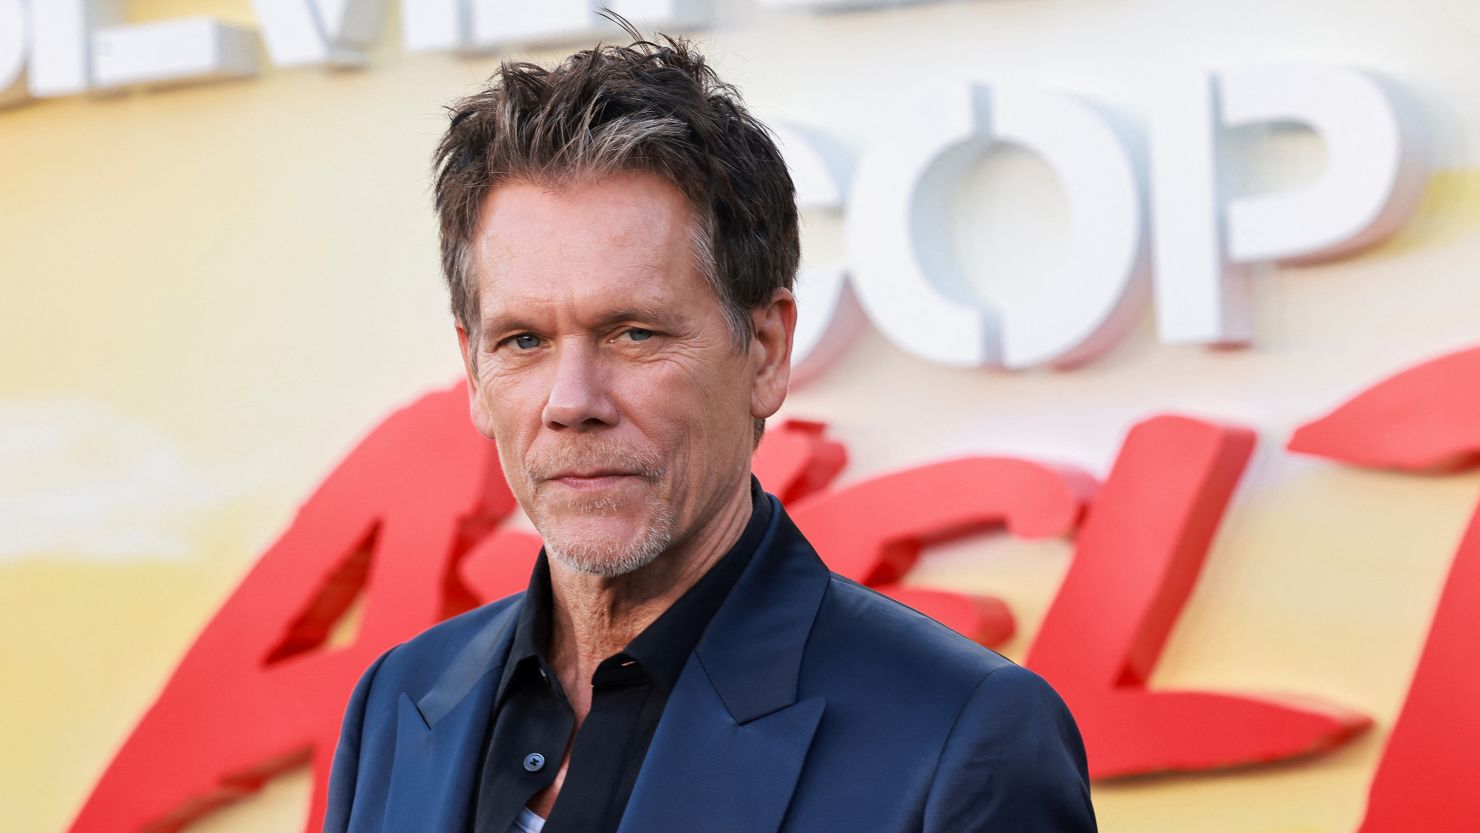 Kevin Bacon attends the world premiere of "Beverly Hills Cop: Axel F" at the Wallis Annenberg Center for the Performing Arts in Beverly Hills, California, June 20.